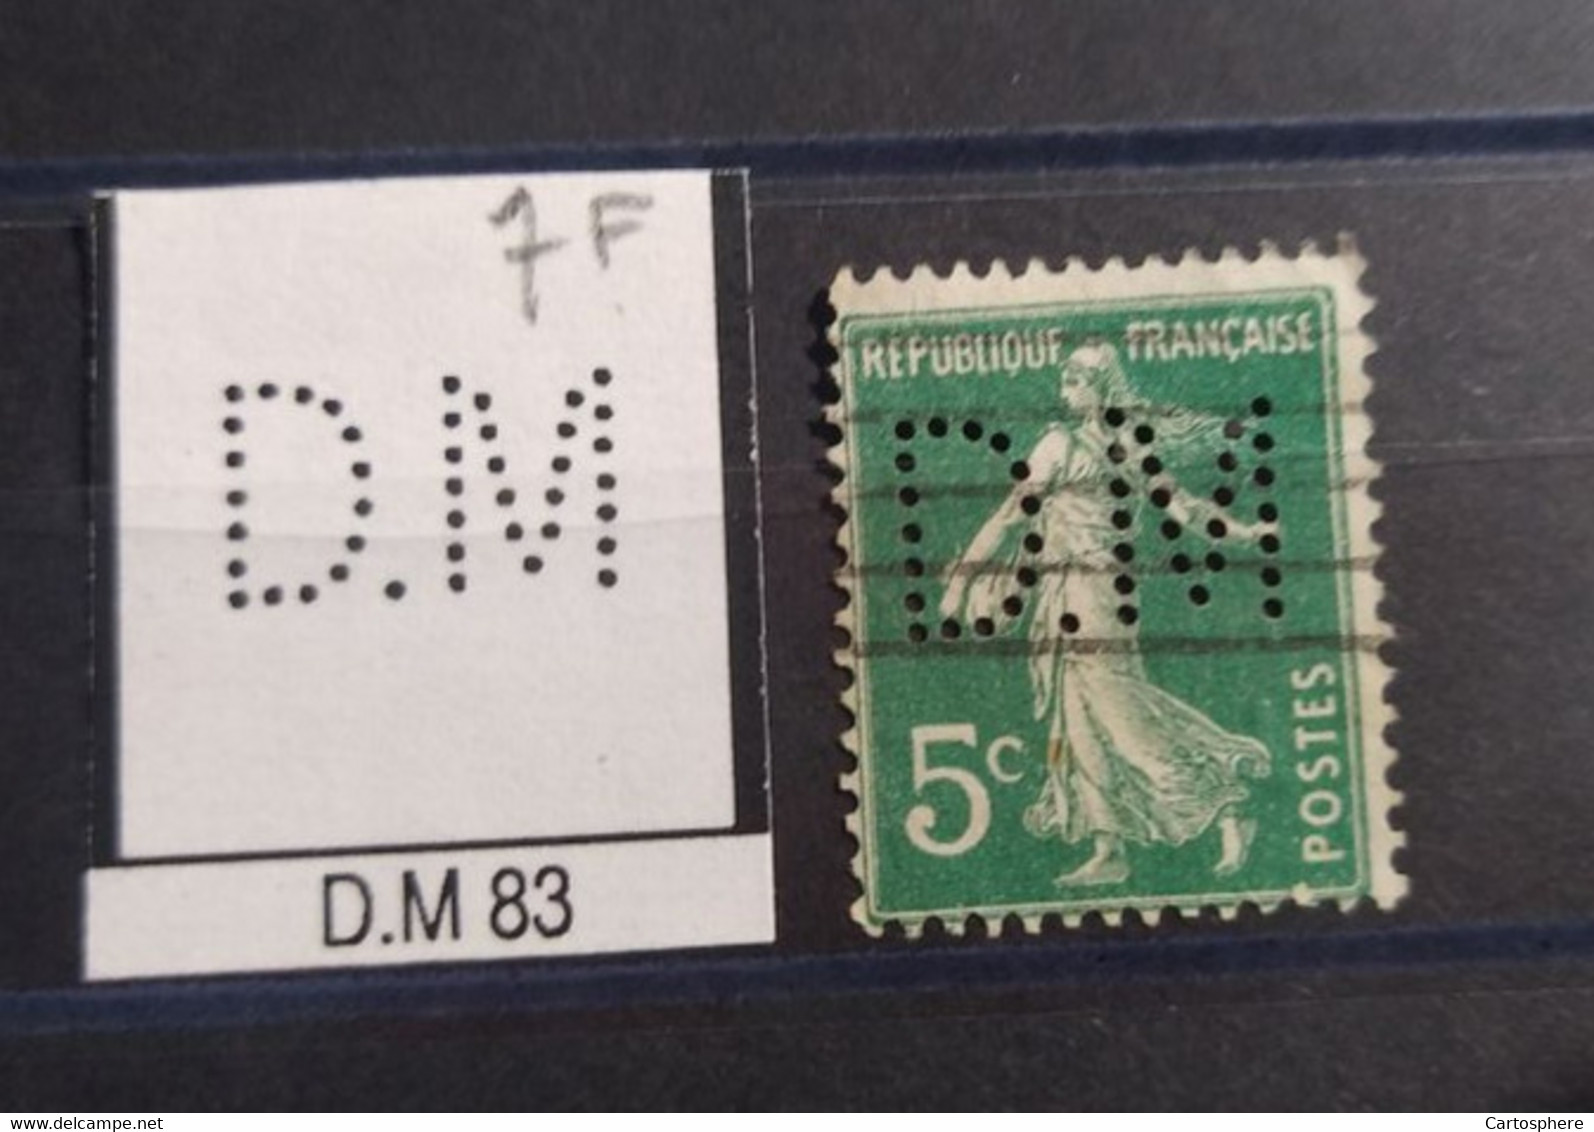 FRANCE D.M 83 TIMBRE DM 83   INDICE 6 SUR 137 PERFORE PERFORES PERFIN PERFINS PERFO PERFORATION PERFORIERT - Used Stamps